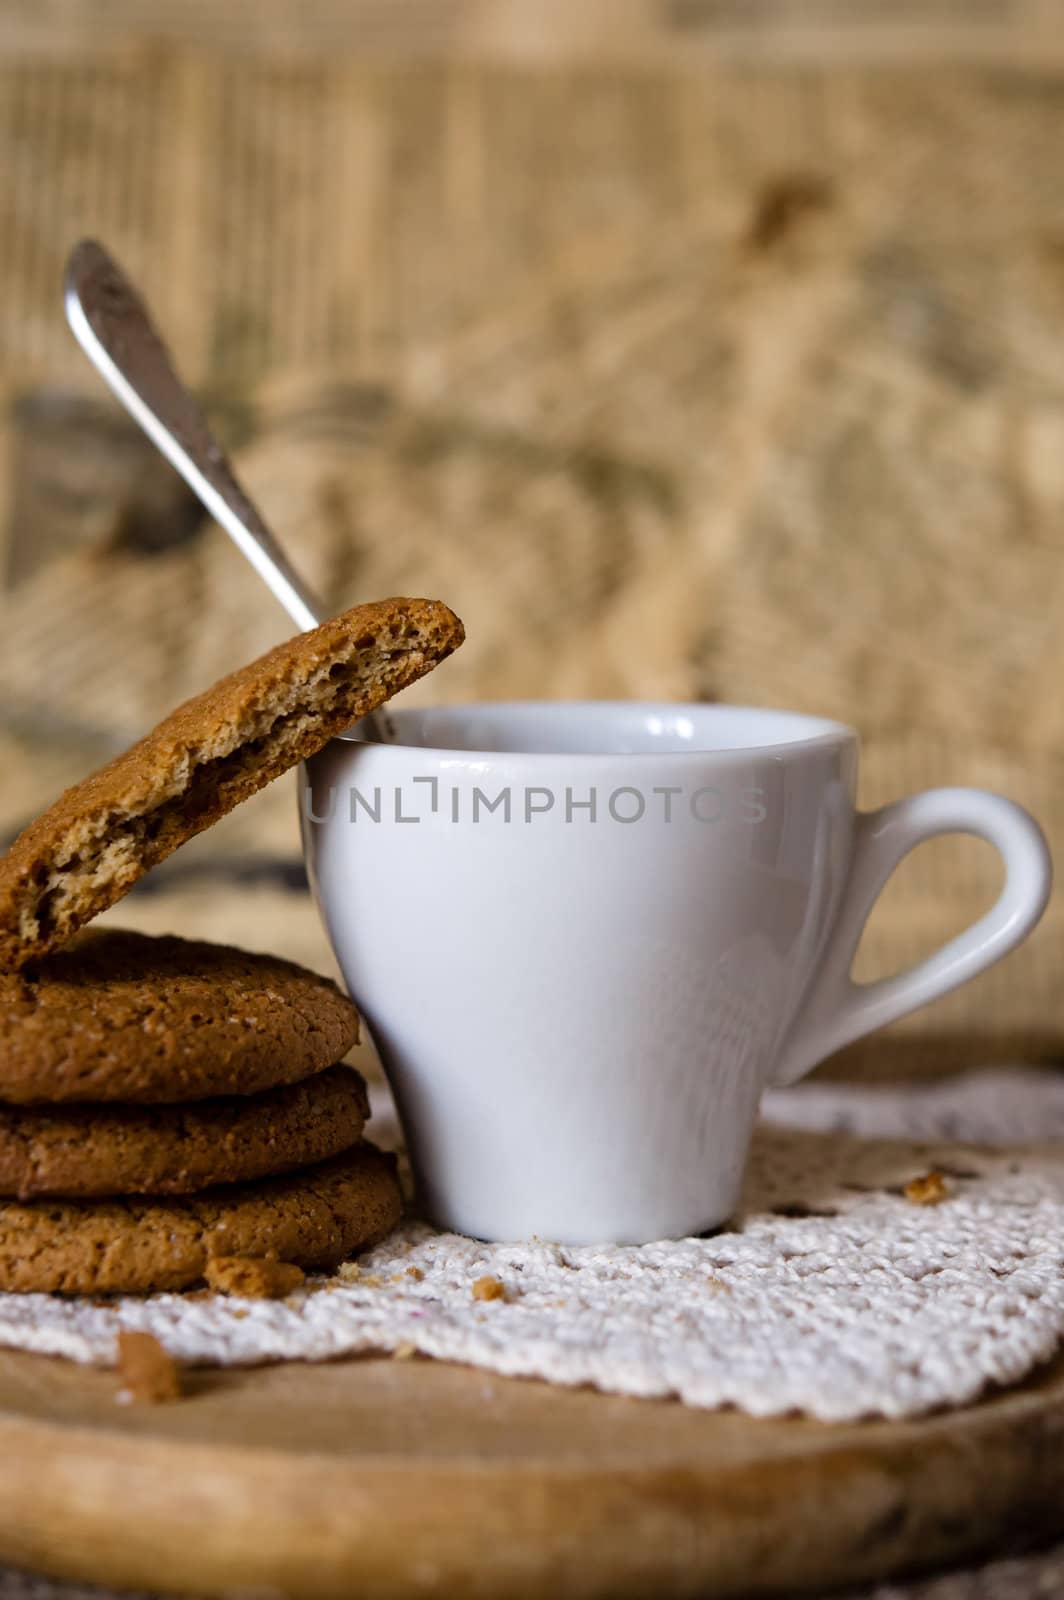 Crumbling oat cookies biscuits with cup of coffee. Shallow DOF